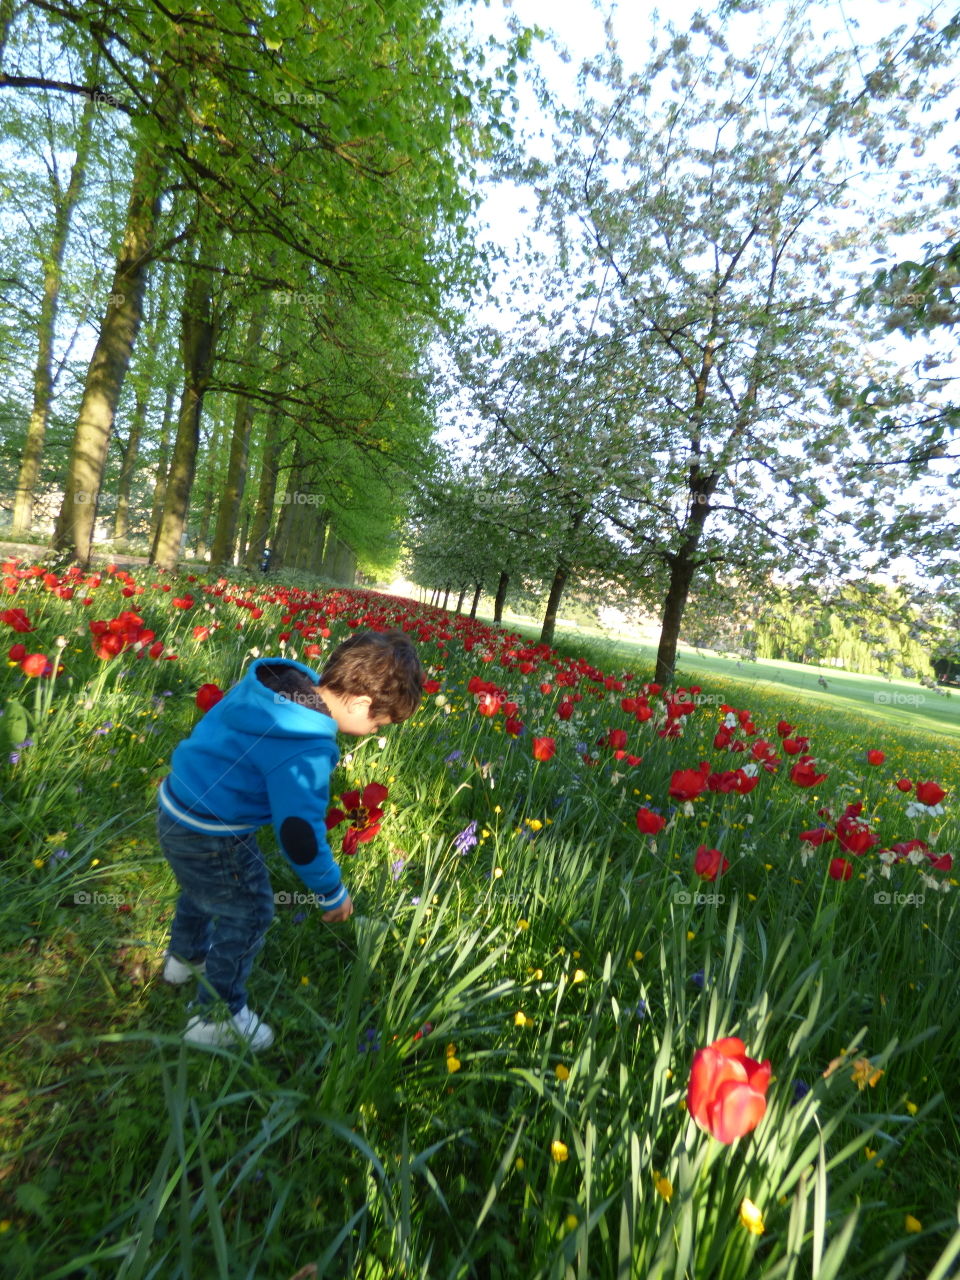 little boy  is picking poppy flowers during spring time in beautiful scenery wearing blue jacket and jeans